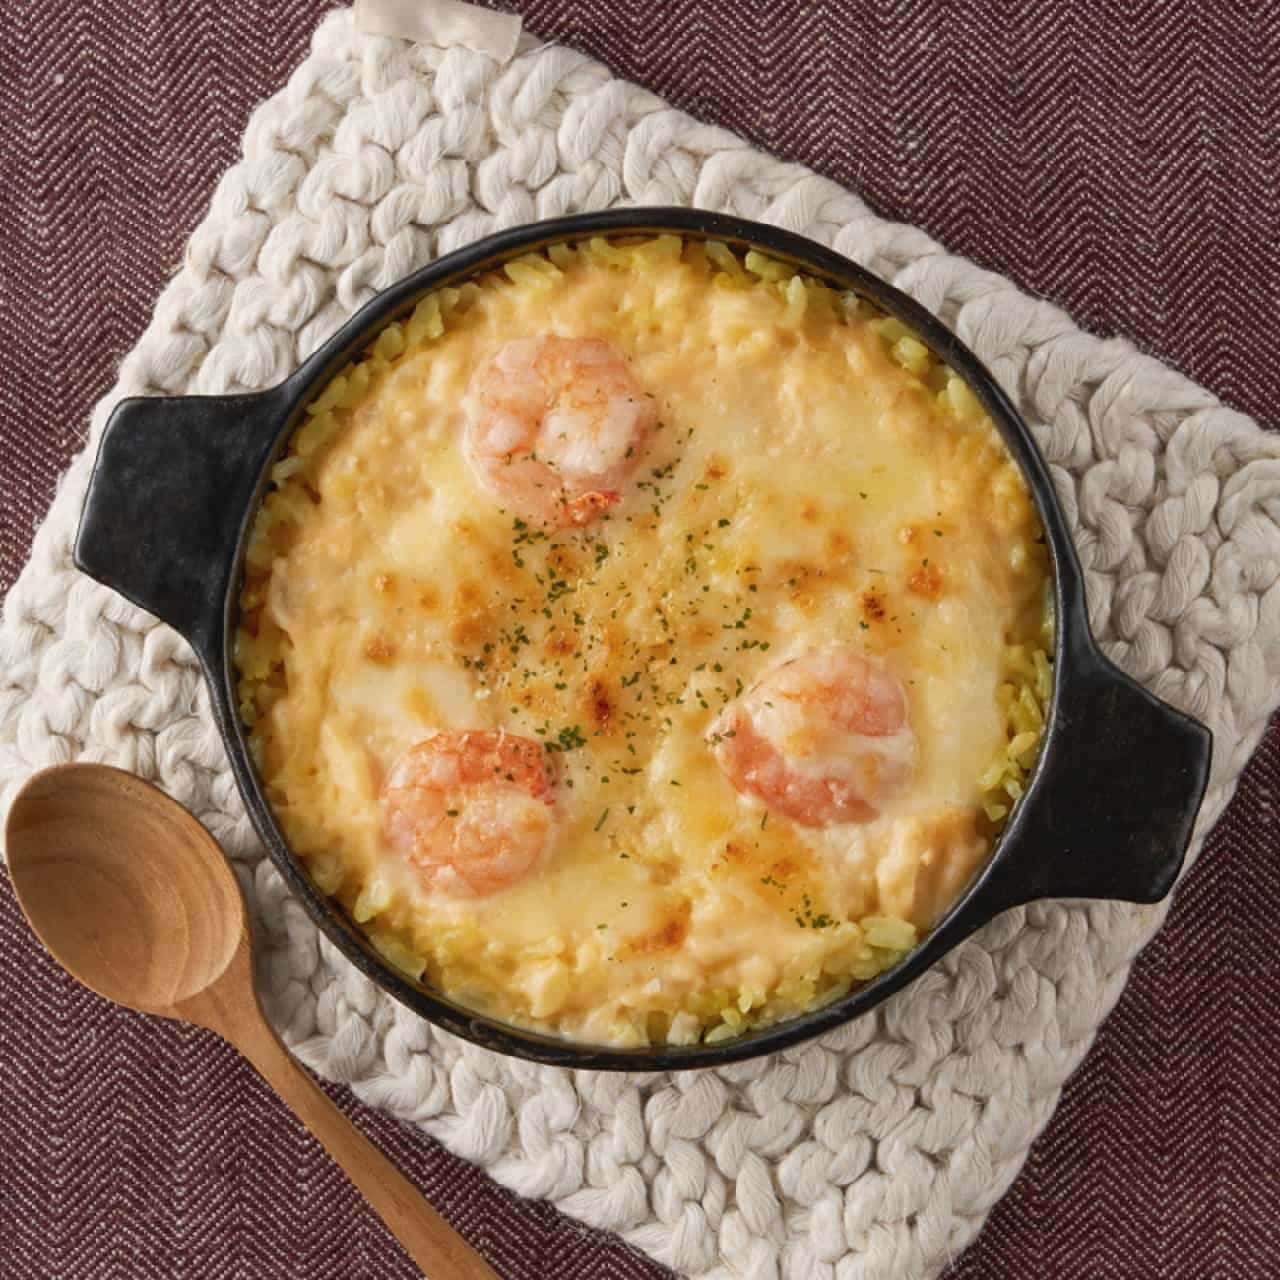 Denny's "Lobster-Scented Shrimp Doria with Turmeric Rice" serving example